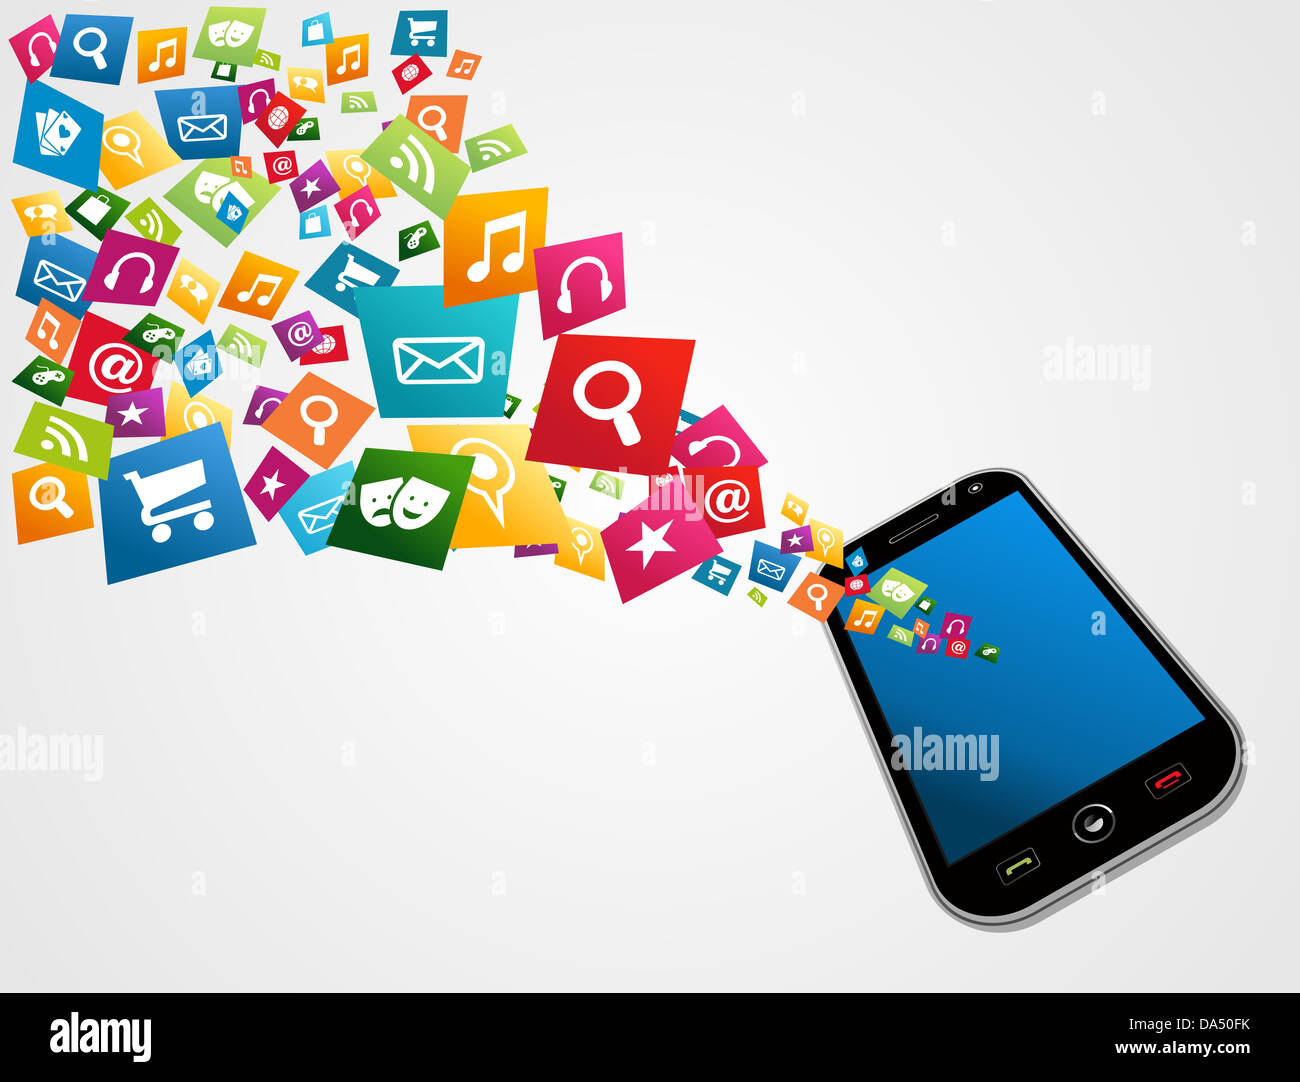 Smartphone Download Apps Icon Set Concept Background Vector Stock Photo Alamy